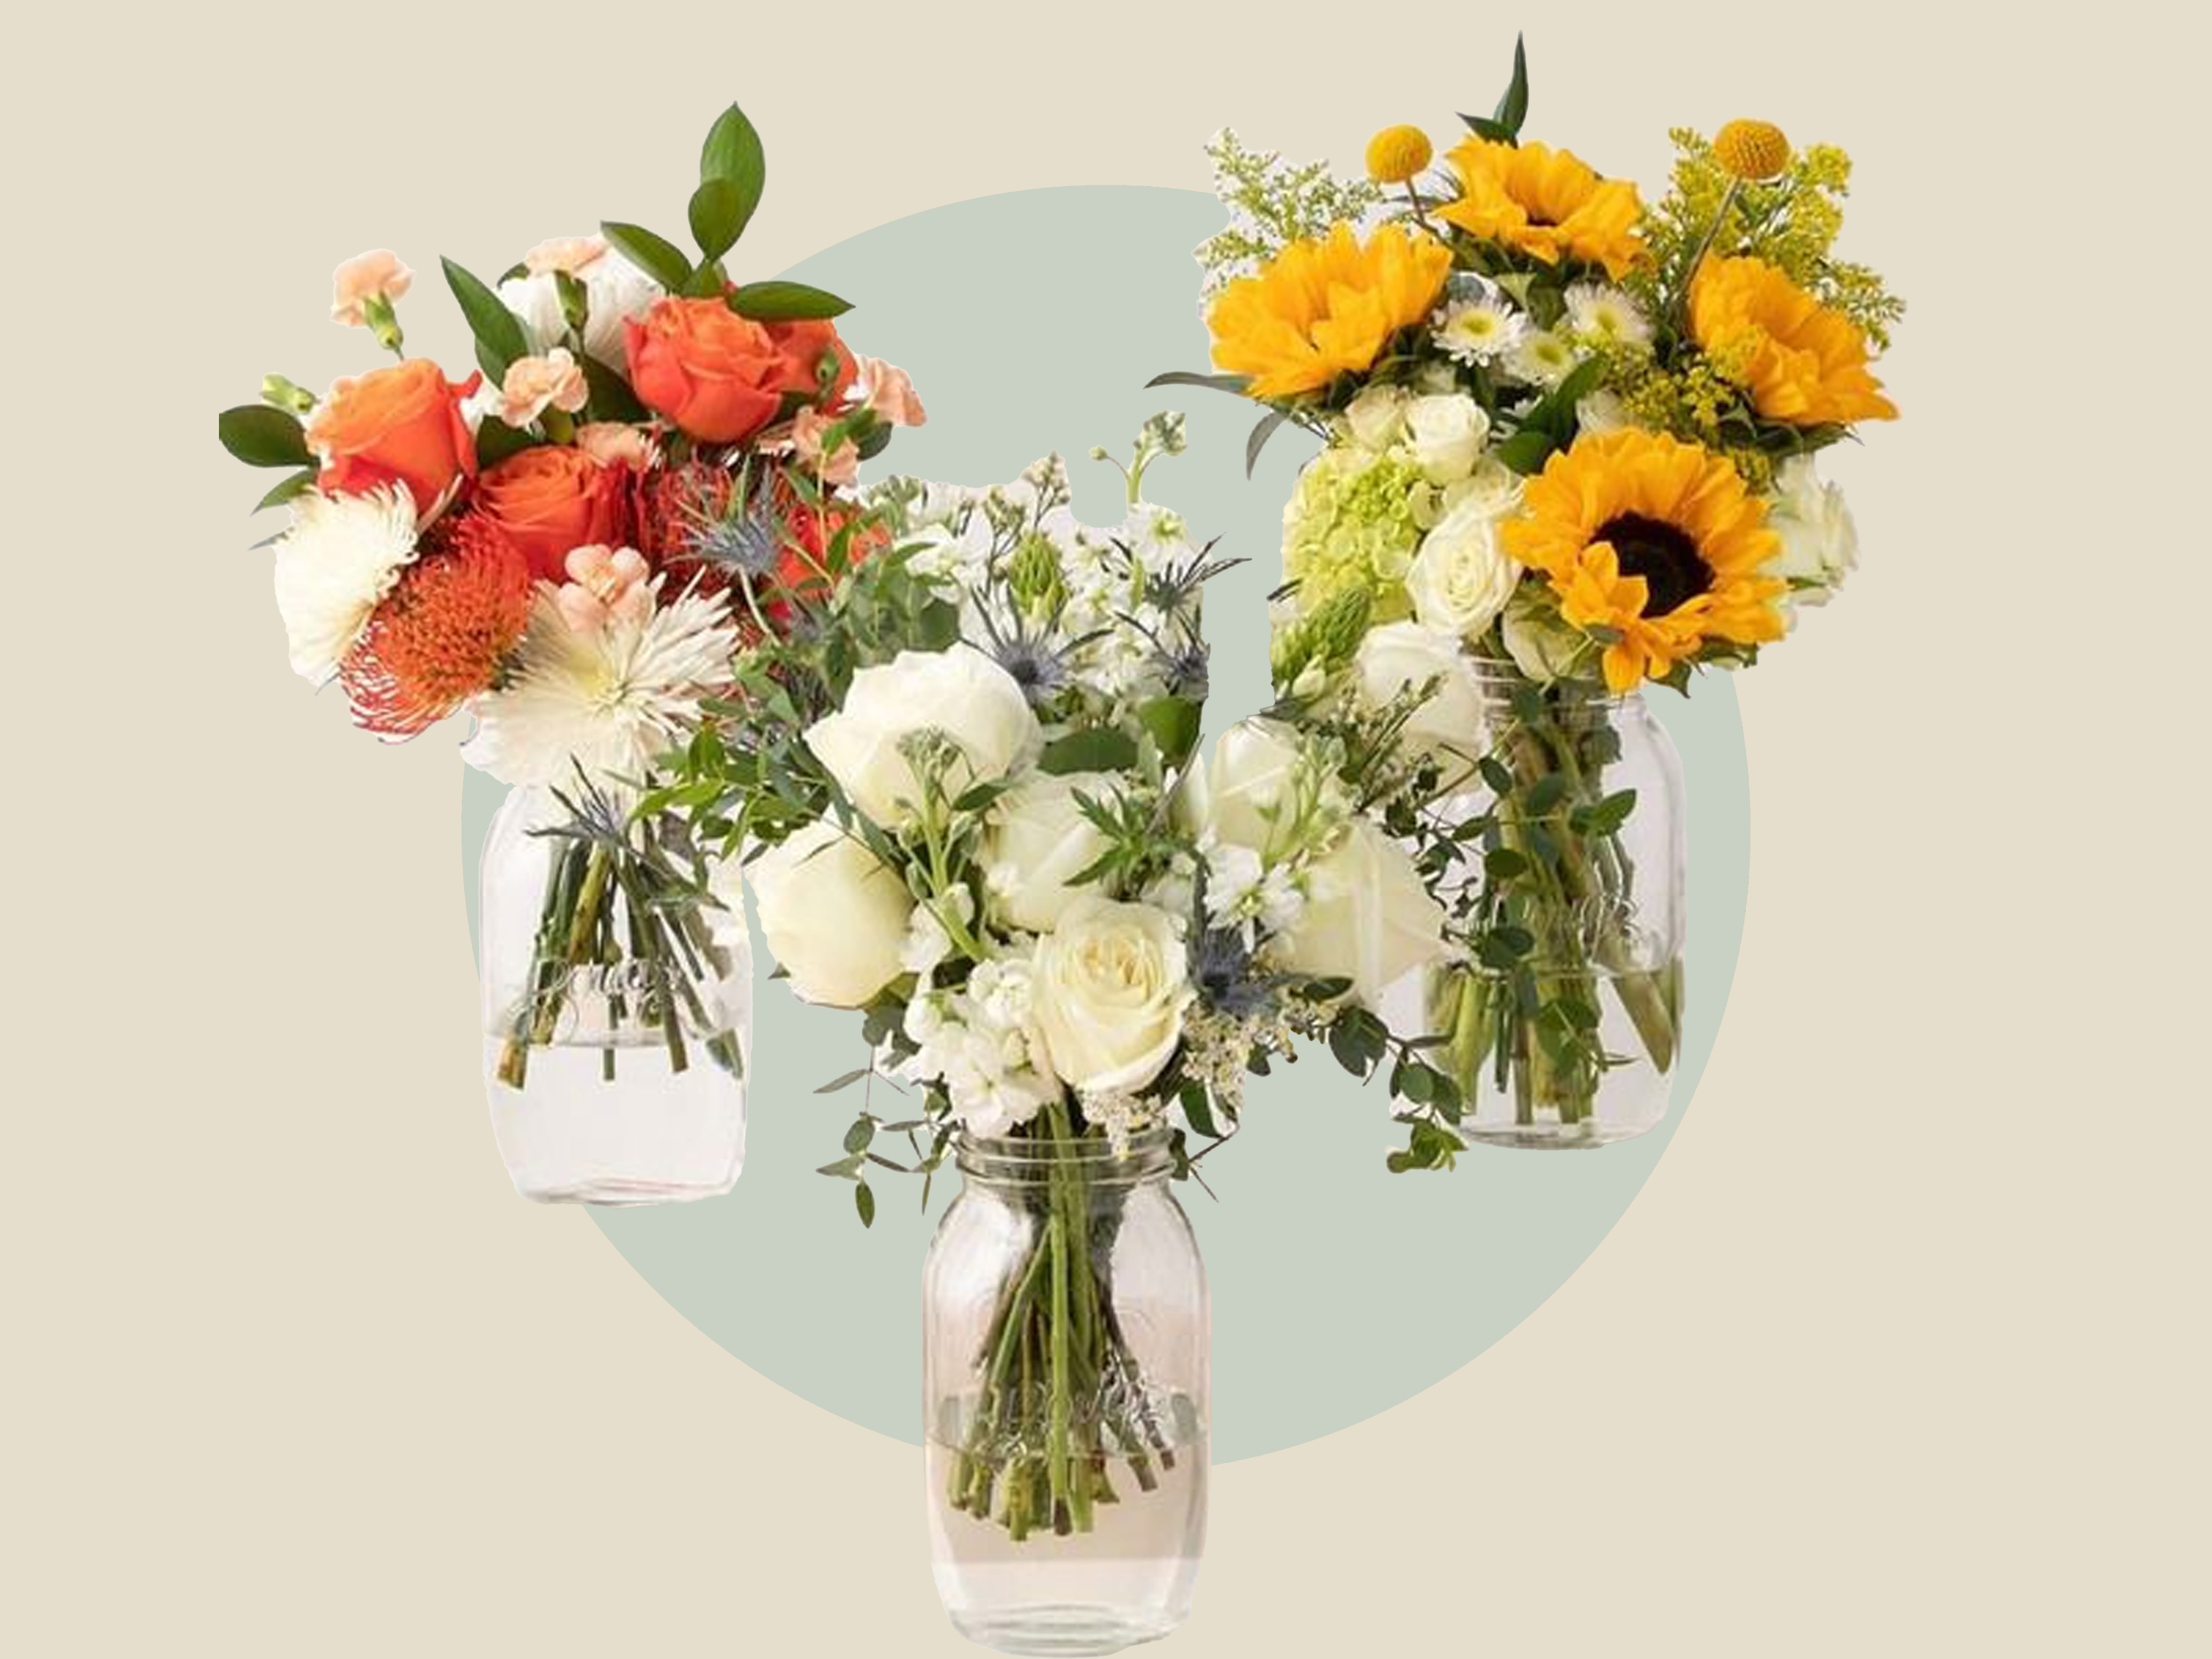 Flower Delivery Services That Will Bring a Beautiful Bouquet Right to Your Loved One's Door This Mothers's Day